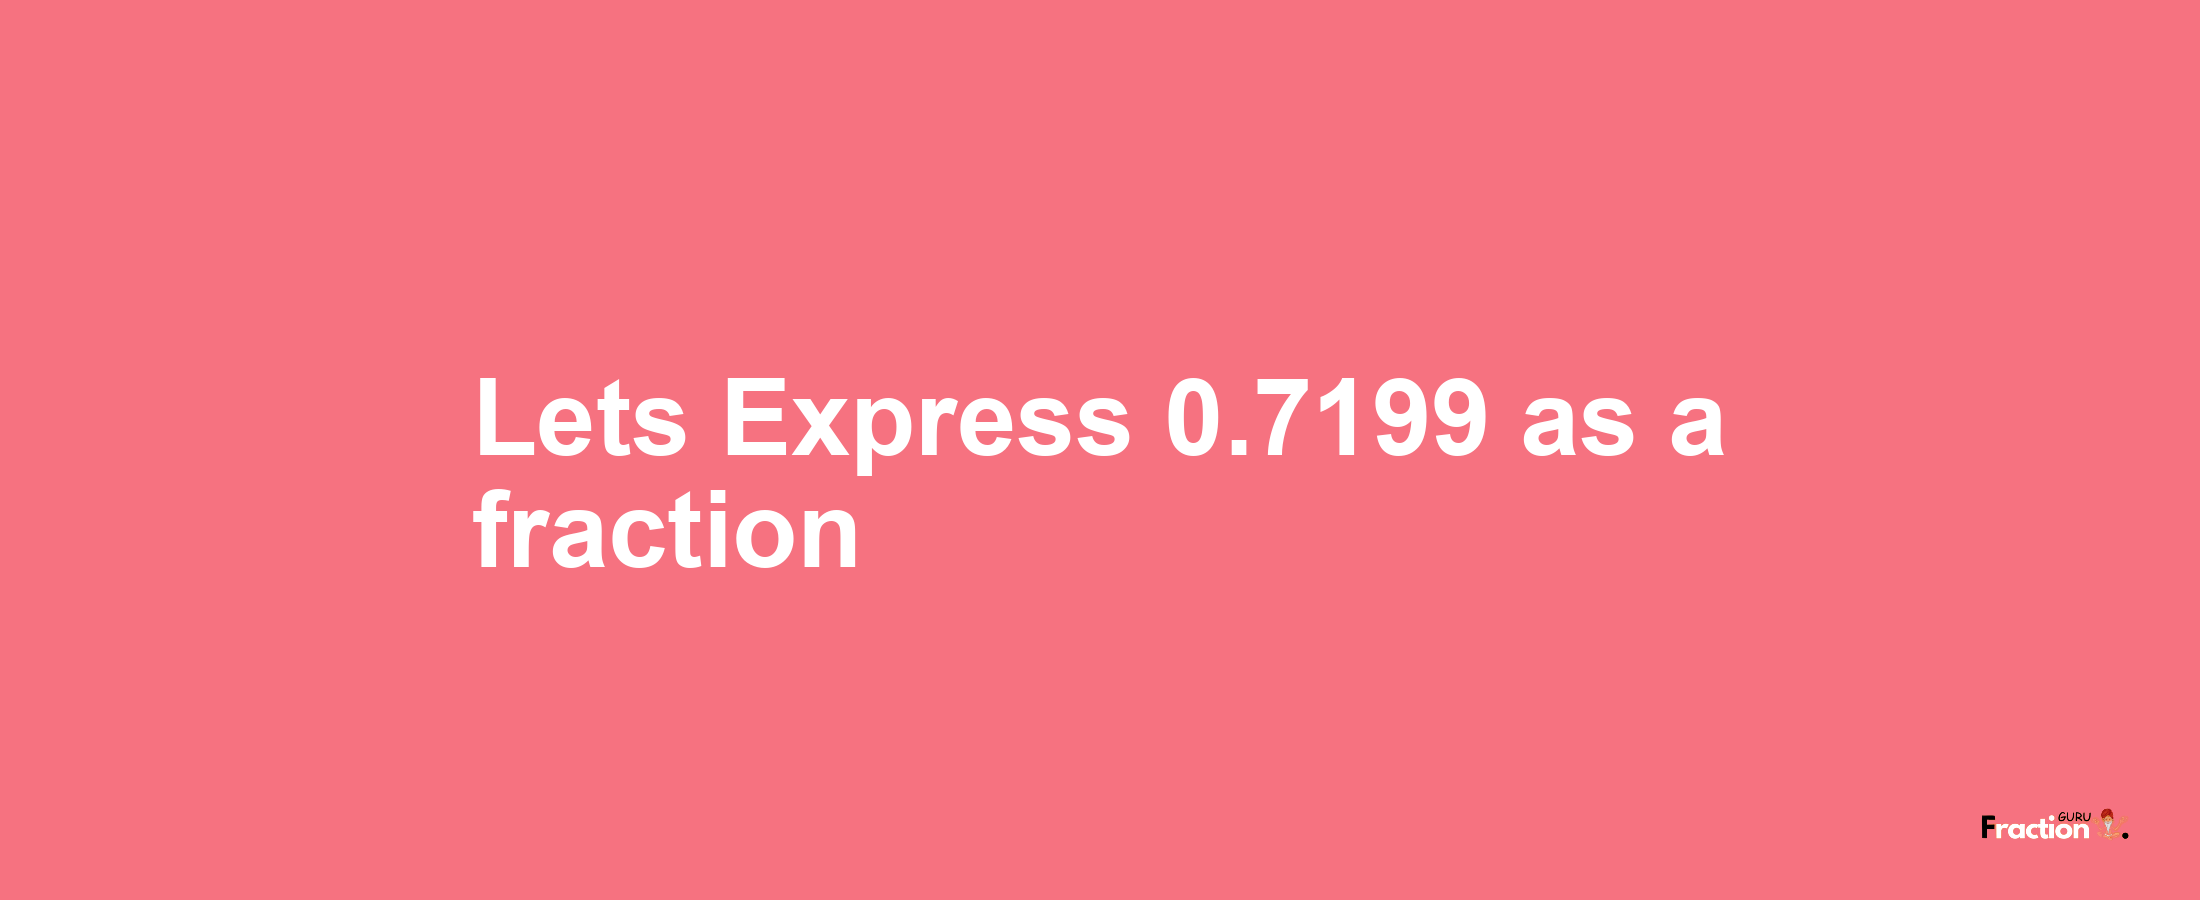 Lets Express 0.7199 as afraction